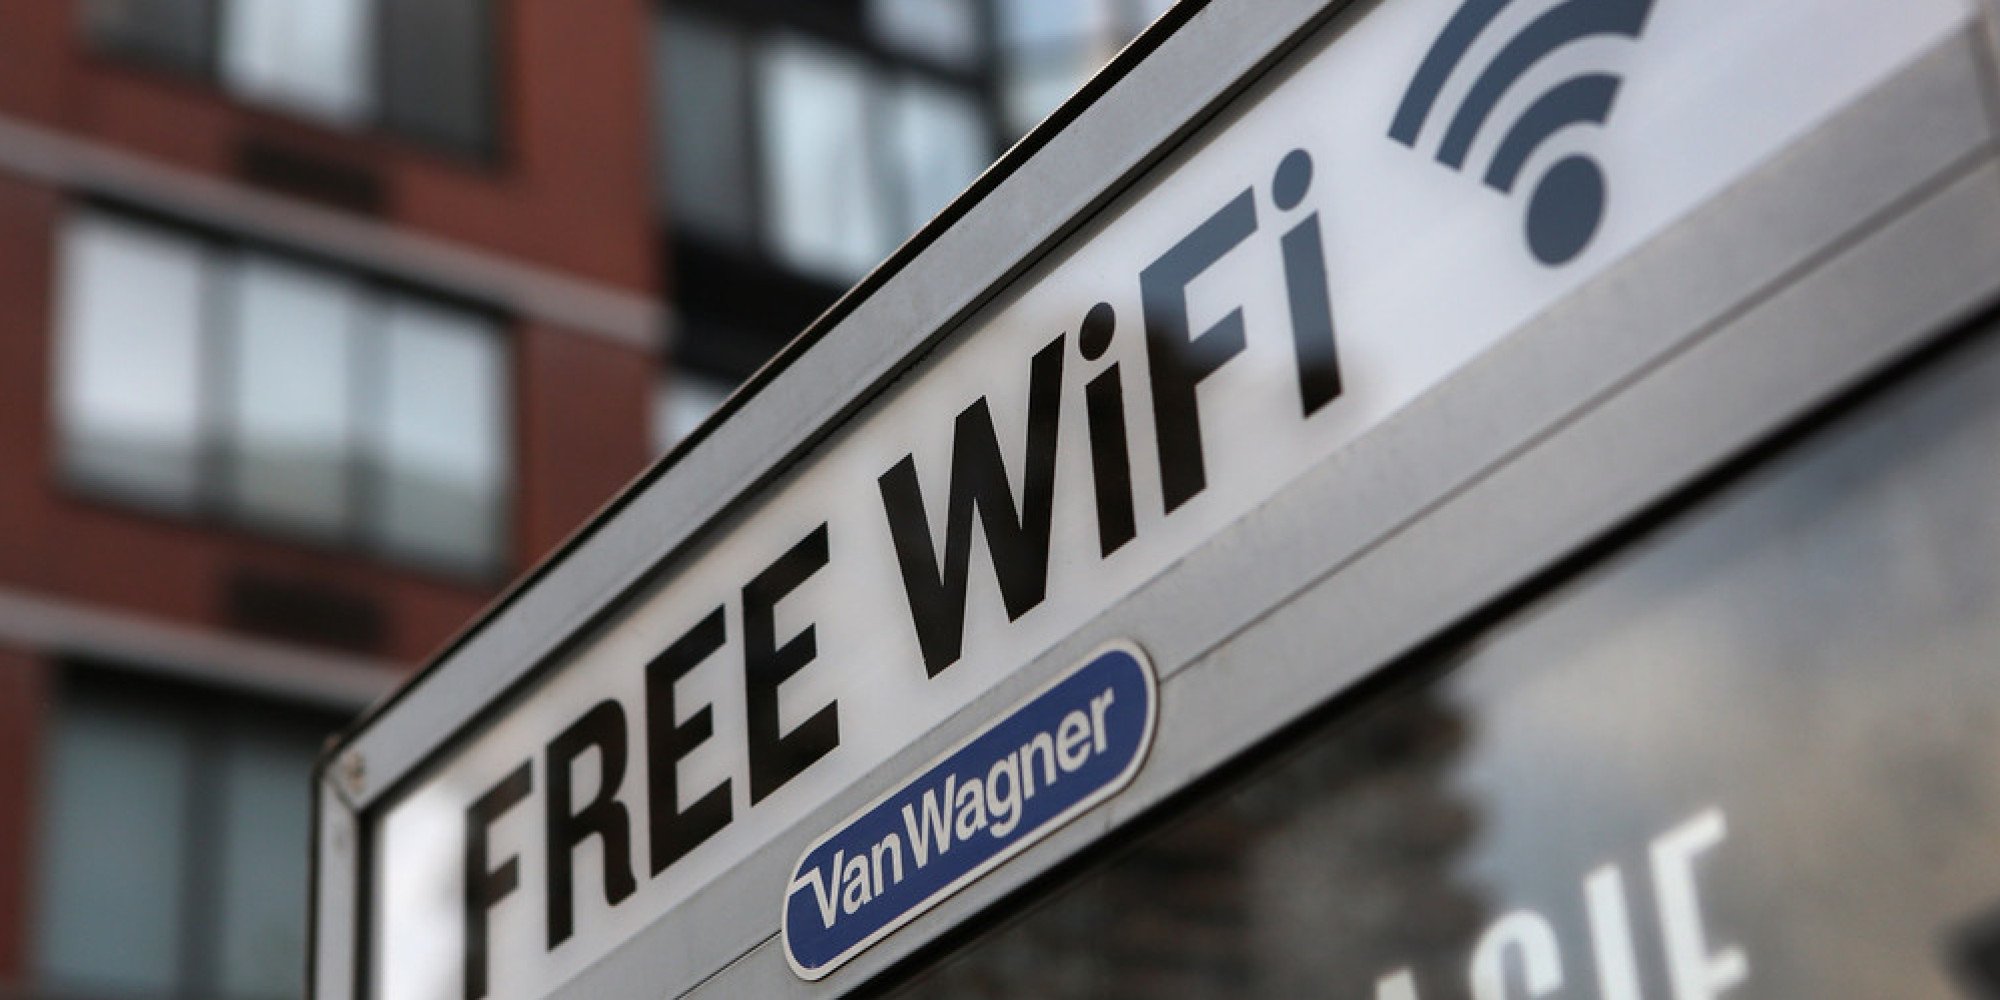 NYC To Turn Some Of Its 12,000 Phone Booths Into Free Wifi Spots